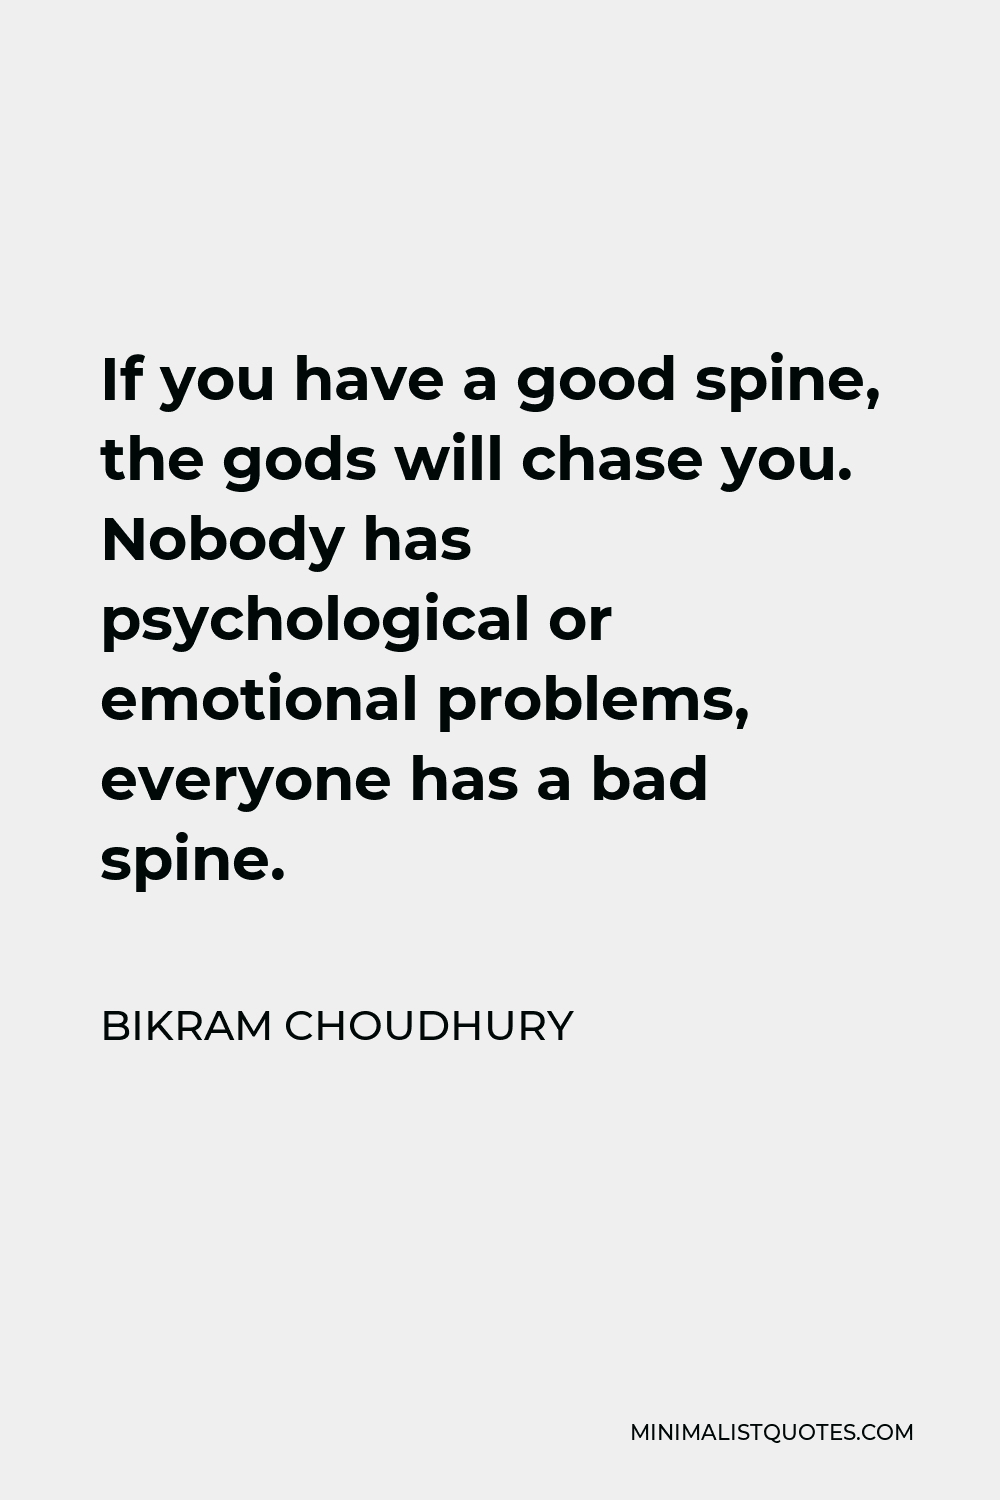 Bikram Choudhury Quote - If you have a good spine, the gods will chase you. Nobody has psychological or emotional problems, everyone has a bad spine.